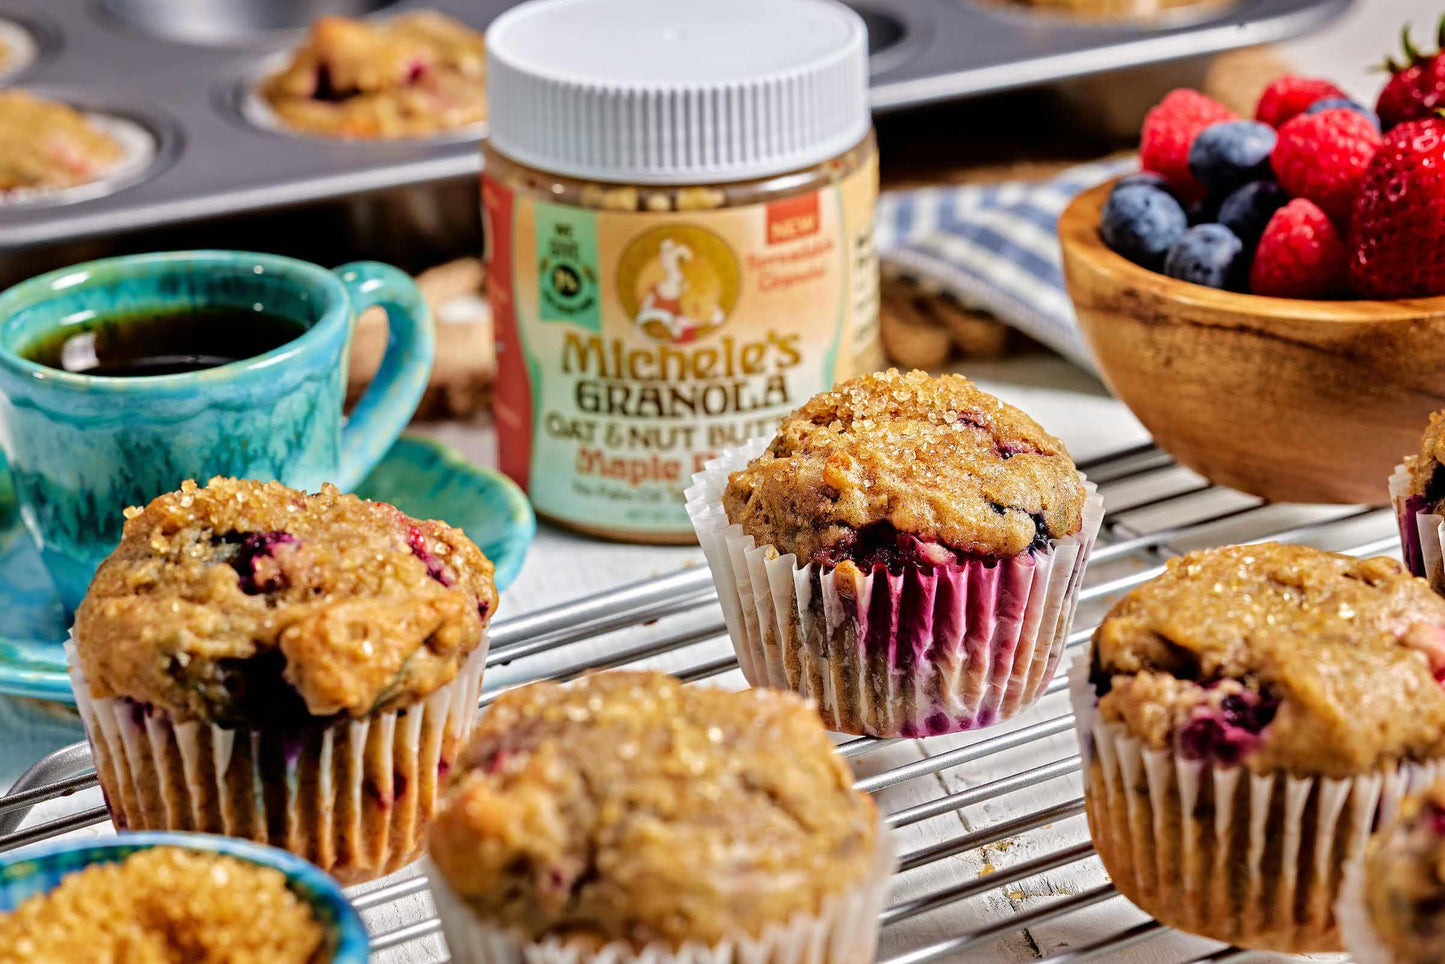 Recipe - Granola Butter Berry Breakfast Muffins made with with Michele's Granola Maple Pecan Oat & Nut Butter - vegan options